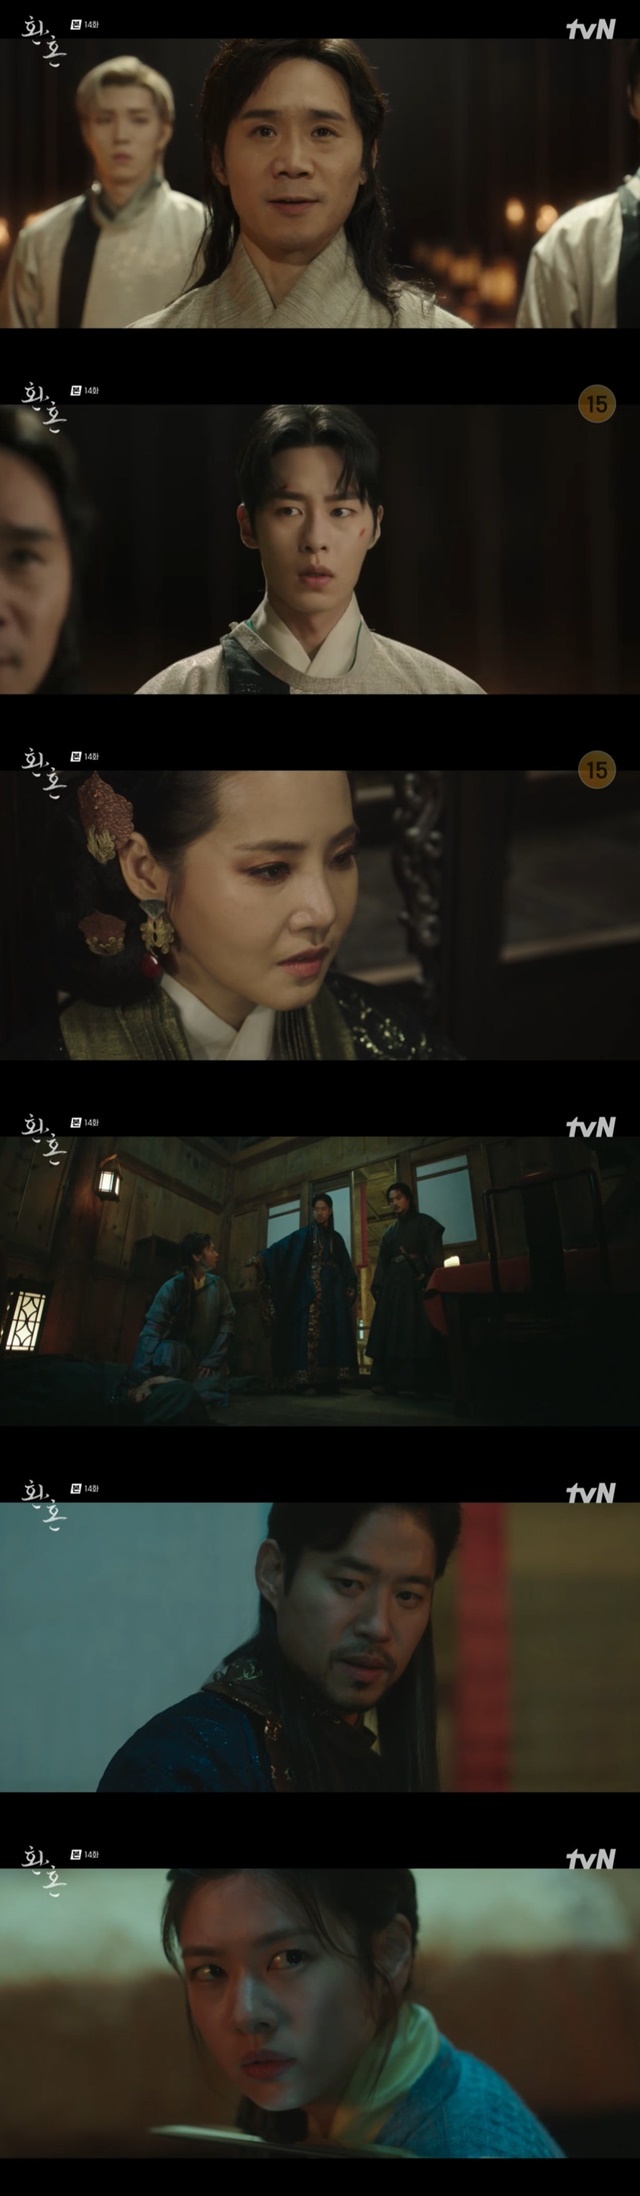 im cheol-su was an Alchemy of Souls, Confessions, and Jung So-min wrote Raw Justice.In the 14th episode of the TVN Saturday drama Alchemy of Souls (playplayed by Hong Jeong-eun, Hong Mi-ran/director Park Joon-hwa), which was broadcast on July 31, Lee Seon-saeng (im cheol-su) was an Alchemy of Souls, so he was Confessions and Moo-min was in crisis by writing Raw Justice.Park Jin (Yoo Jun-sang) was worried that Jang Wook (Lee Jae-wook), who was born on the castle of King Jae-wook, would put the world in chaos, but Lee Seon-saeng (im cheol-su) said, Do not worry.Im thinking about it, too. If I have to get rid of it, Ill get rid of it myself.The Seja Highland (Shin Seung-ho) was deceived by Jung So-min and practiced Jangwook. He was angry at writing nine gold toads and abandoned the yin and yangok of the virtue, and the last 10 battles walked the virtue.In addition, the plateau left the last Battle to Hwang Min-hyun with the intention to make Jang-wook lose to the end.Seo-yul responded to Battle with the intention of separating Jang-wook and Mudeok.Jang Wook and Seo Yul were Battled with his servant, and Jang Wook showed a great growth in the past nine Dalian masters techniques.The result was a victory for Seo-yul, but the admiration for Jang-wook, who was in the dimensions of the dimensions in a short time, was poured out.Seo-yul said, There is no one I want to take when I go to Seoho Castle. Help him go together.Jang Wook was treated for injuries and went to see the virtue, and was jealous of his affection and affection.Jang Wook then met Huh Yoon-ok (Hong Seo-hee) and knew that Mudeok did not meet him when Huh Yoon-ok visited him earlier.This time, Moo-deok showed jealousy of seeing the affection of Jang-wook and Huh Yoon-ok, and Jang-wook kissed Moo-deok.Jinmu (Cho Jae-yoon) made Soi (Seo Hye-won) the daughter of Jin Ho-kyung (Park Eun-hye), and threw those who originally knew Soi as food for the Alchemy of Souls.Jinmu threatened to betray him and become a prey of the Alchemy of Souls, and Soi informed others who knew him more.When Lee was invited by King Gosun (Choi Kwang-il), he entered the court with Jang Wook, Seo-yul, and Park Dang-gu (Yoo In-soo), and Gosun wondered about Lees young secret.Lee said, I am an Alchemy of Souls. I can recognize the Alchemy of Souls.Jangwook was surprised that Lee knew that Mudeok was an Alchemy of Souls, and the Queen Seo Ha-sun (Kang Kyung-heon), an Alchemy of Souls, was nervous.